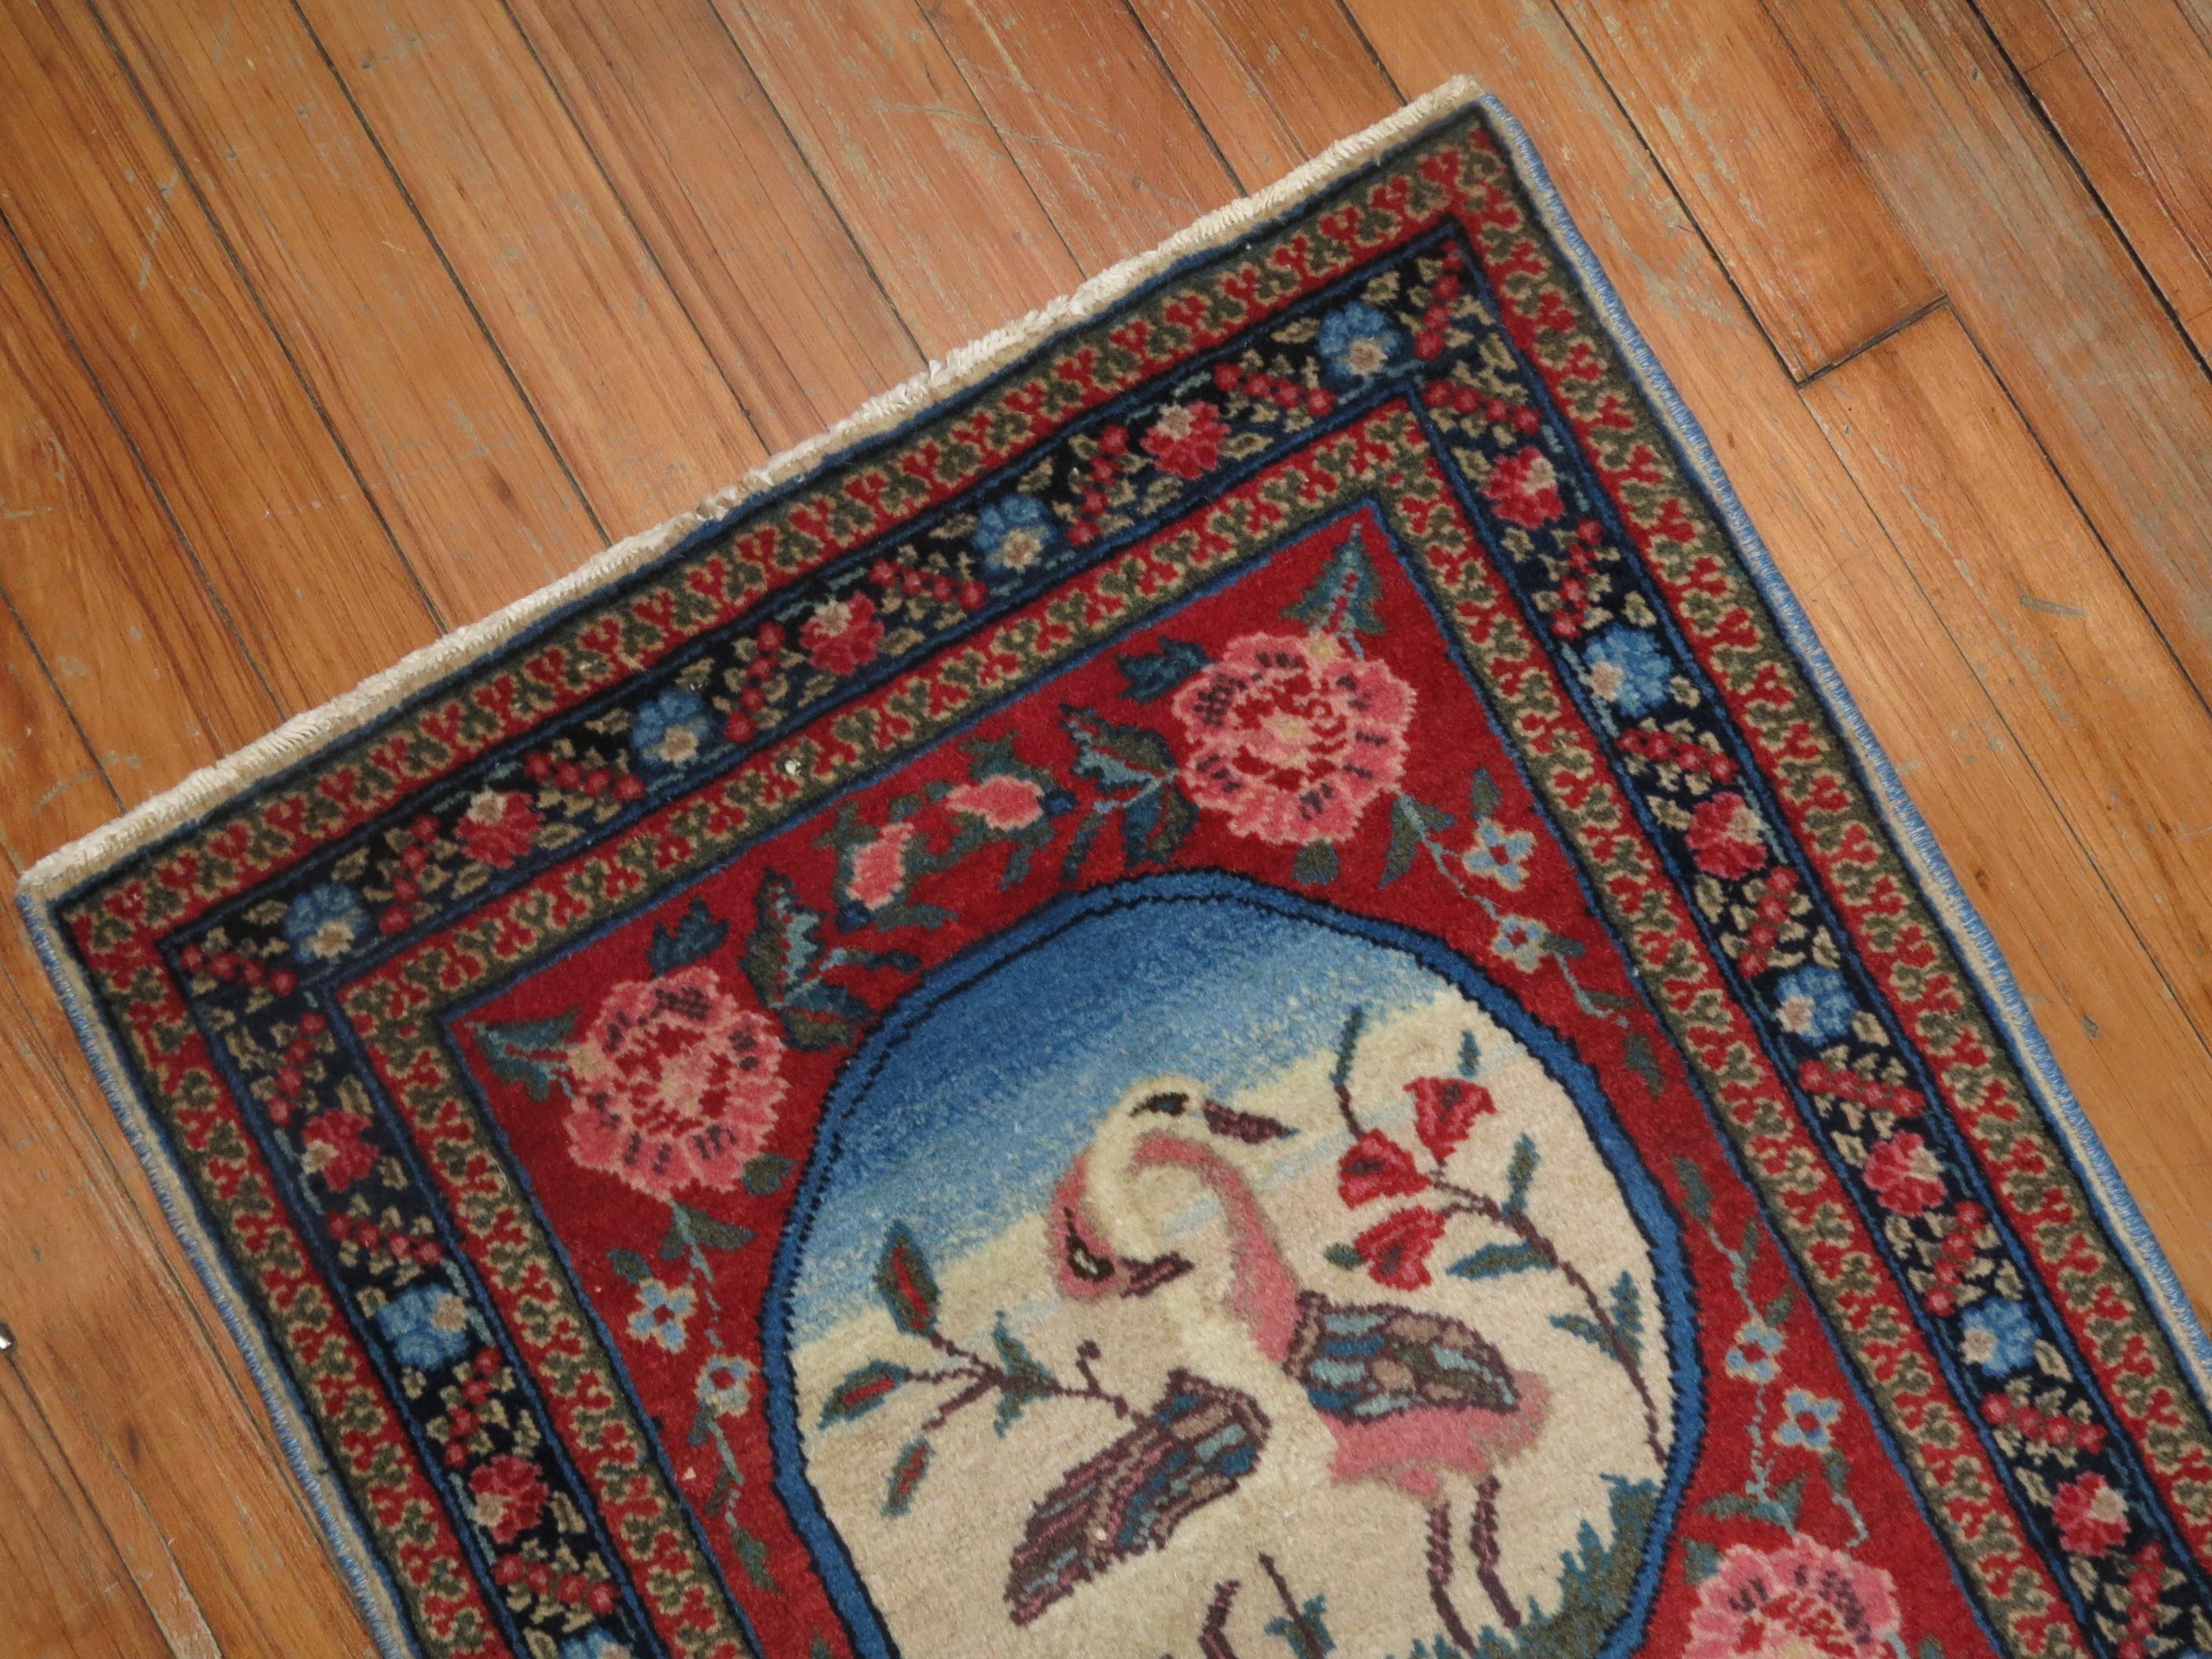 An authentic 20th century Persian pictorial rug with 2 loving swans.